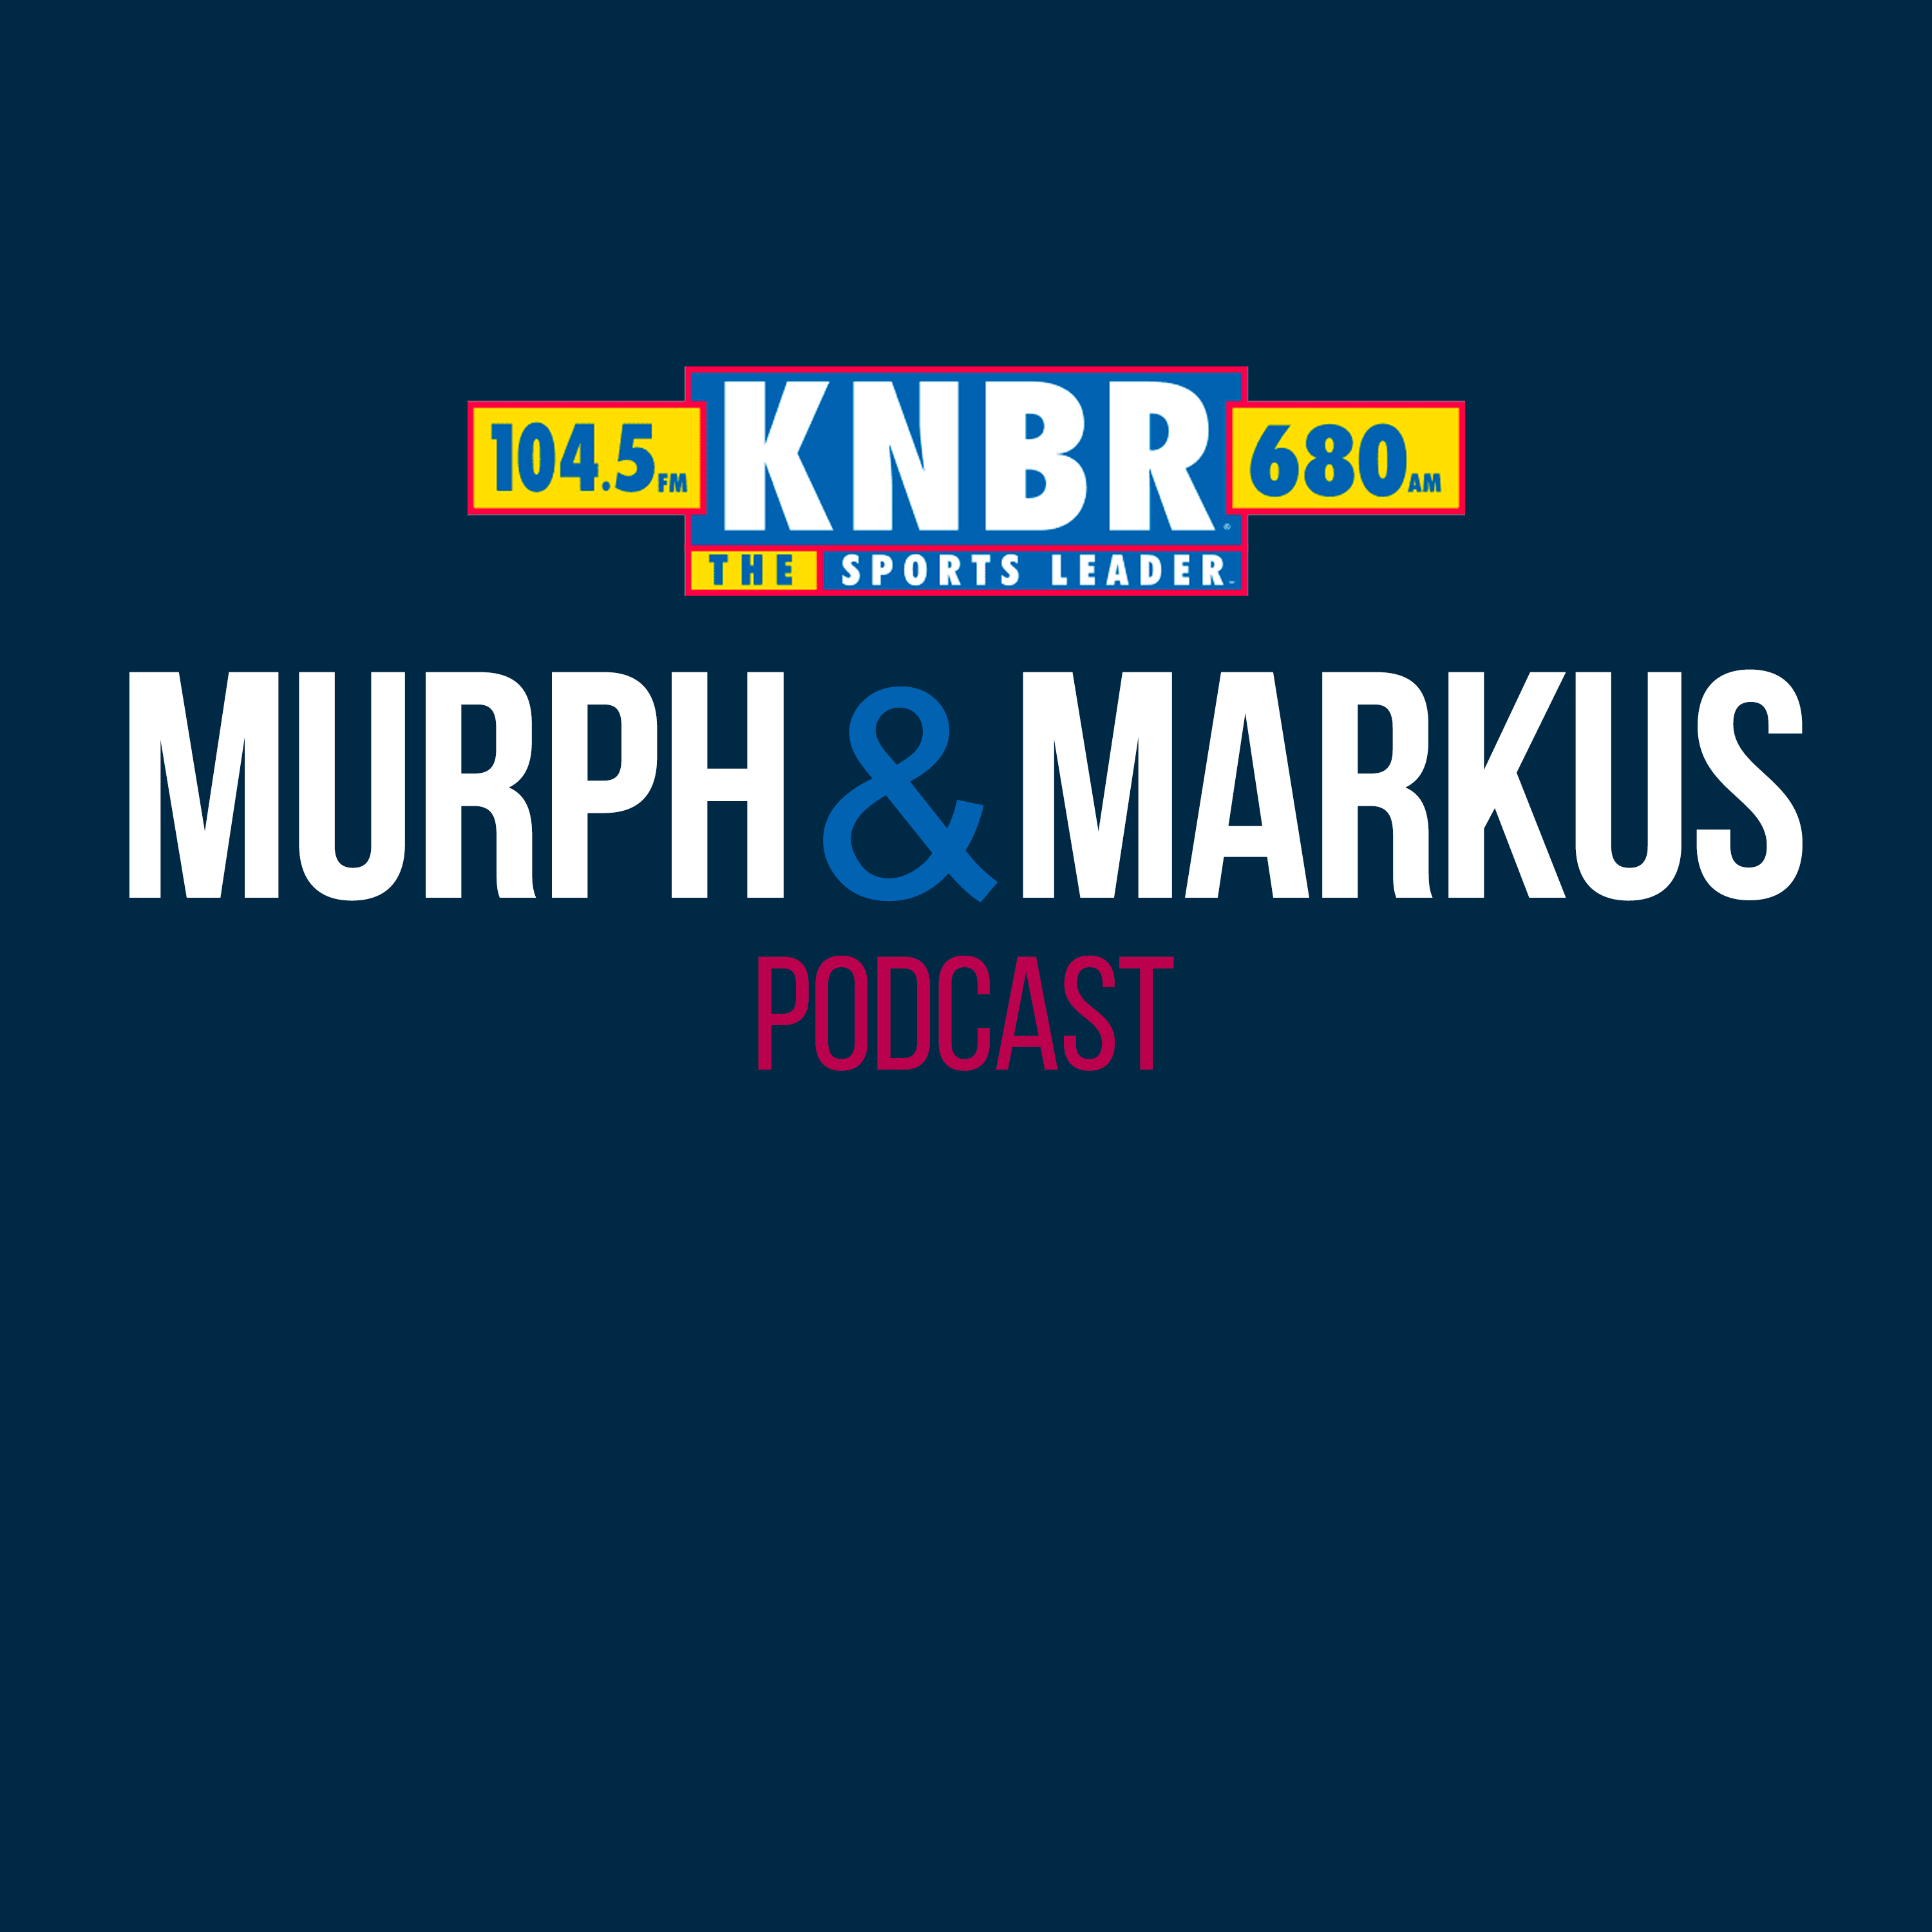 7-24 Matt Barrows joins Murph & Markus to assess whether the 49ers are better than last year, and provide the latest on Ricky Pearsall's hamstring injury